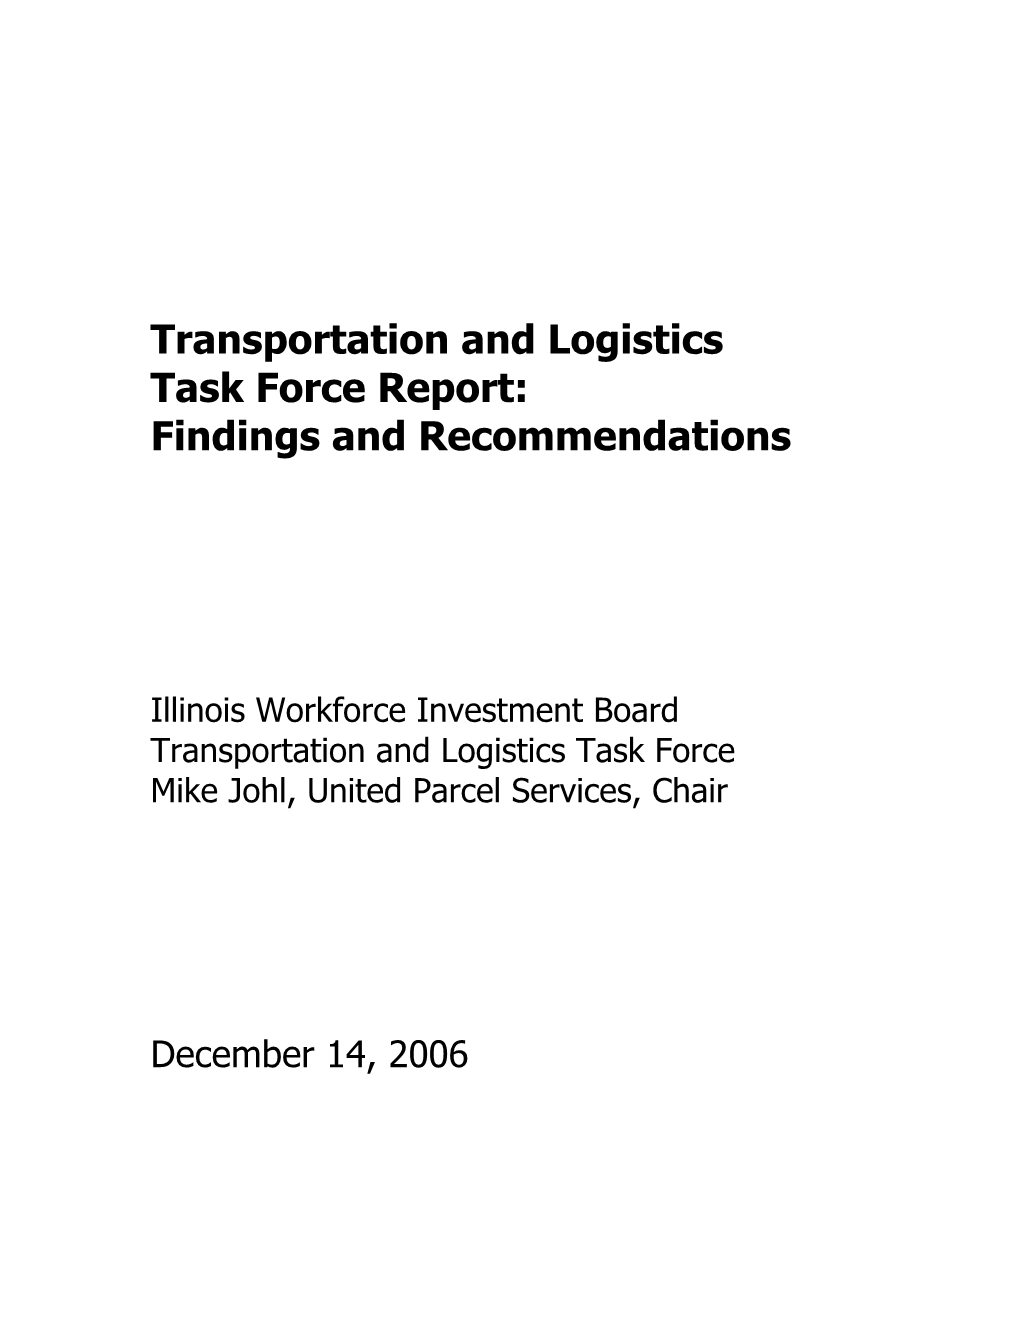 Transportation and Logistics Task Force Report: Findings and Recommendations